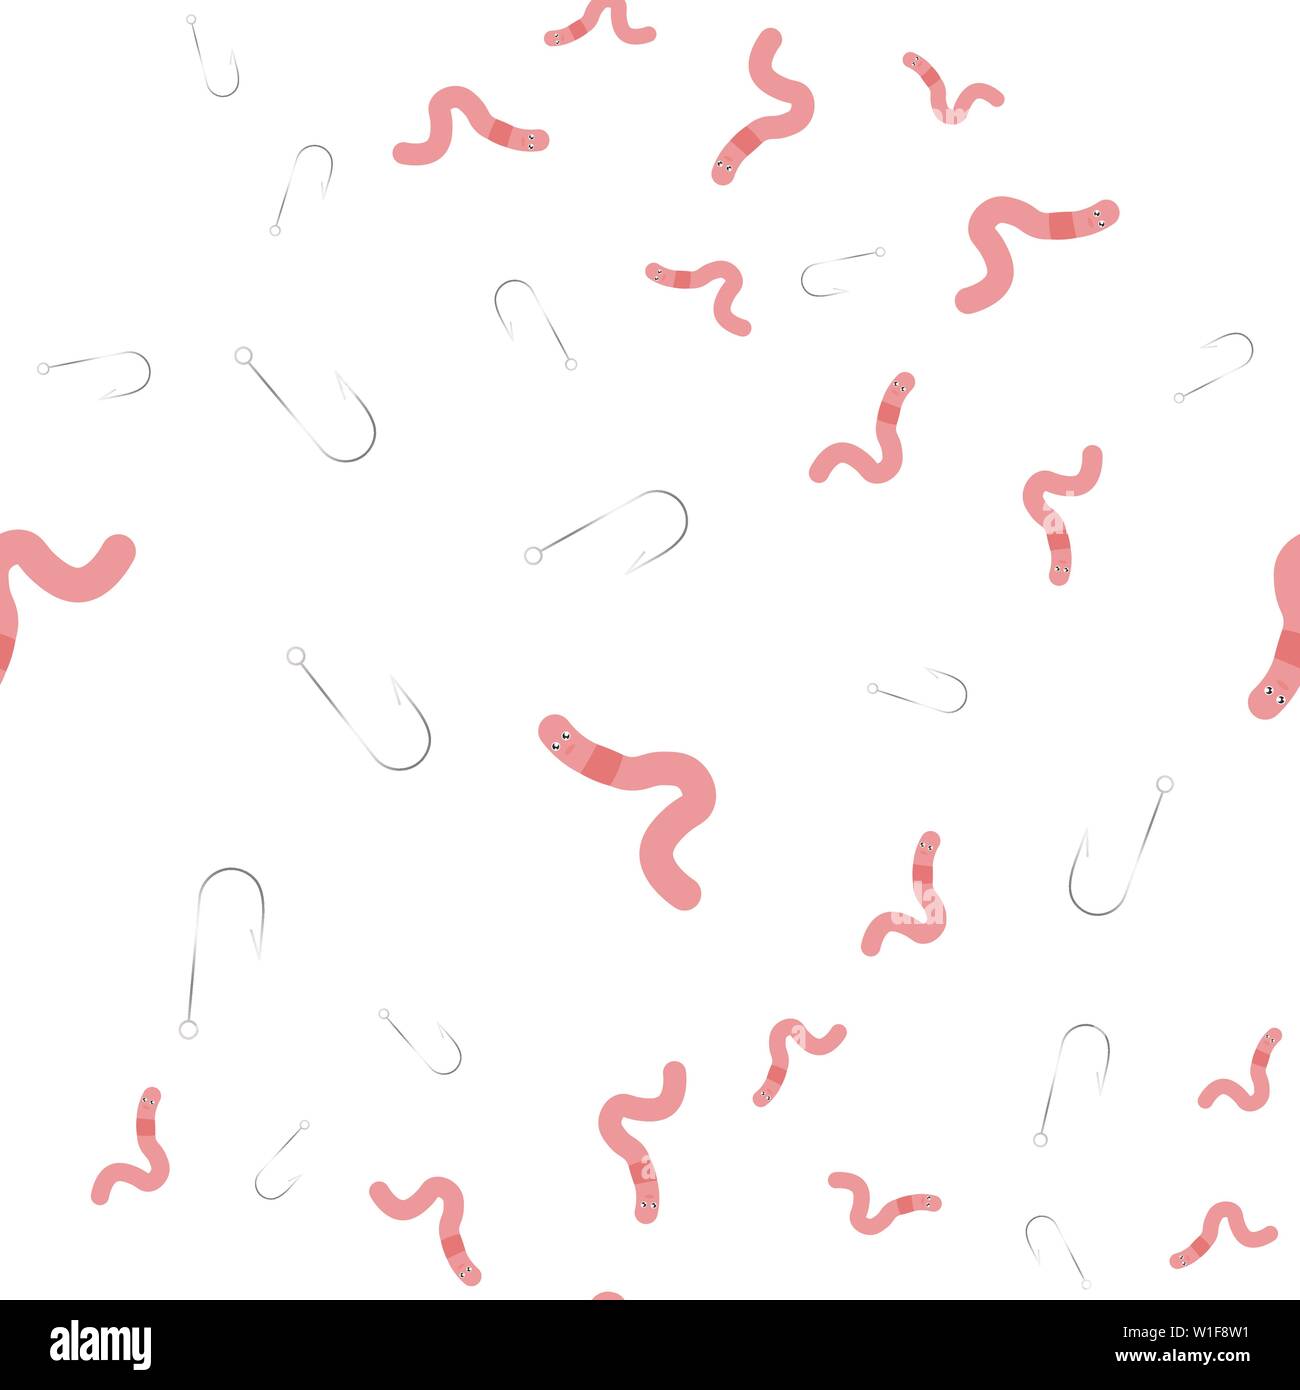 Seamless pattern of worms and hooks. Vector illustration on white background. Stock Vector